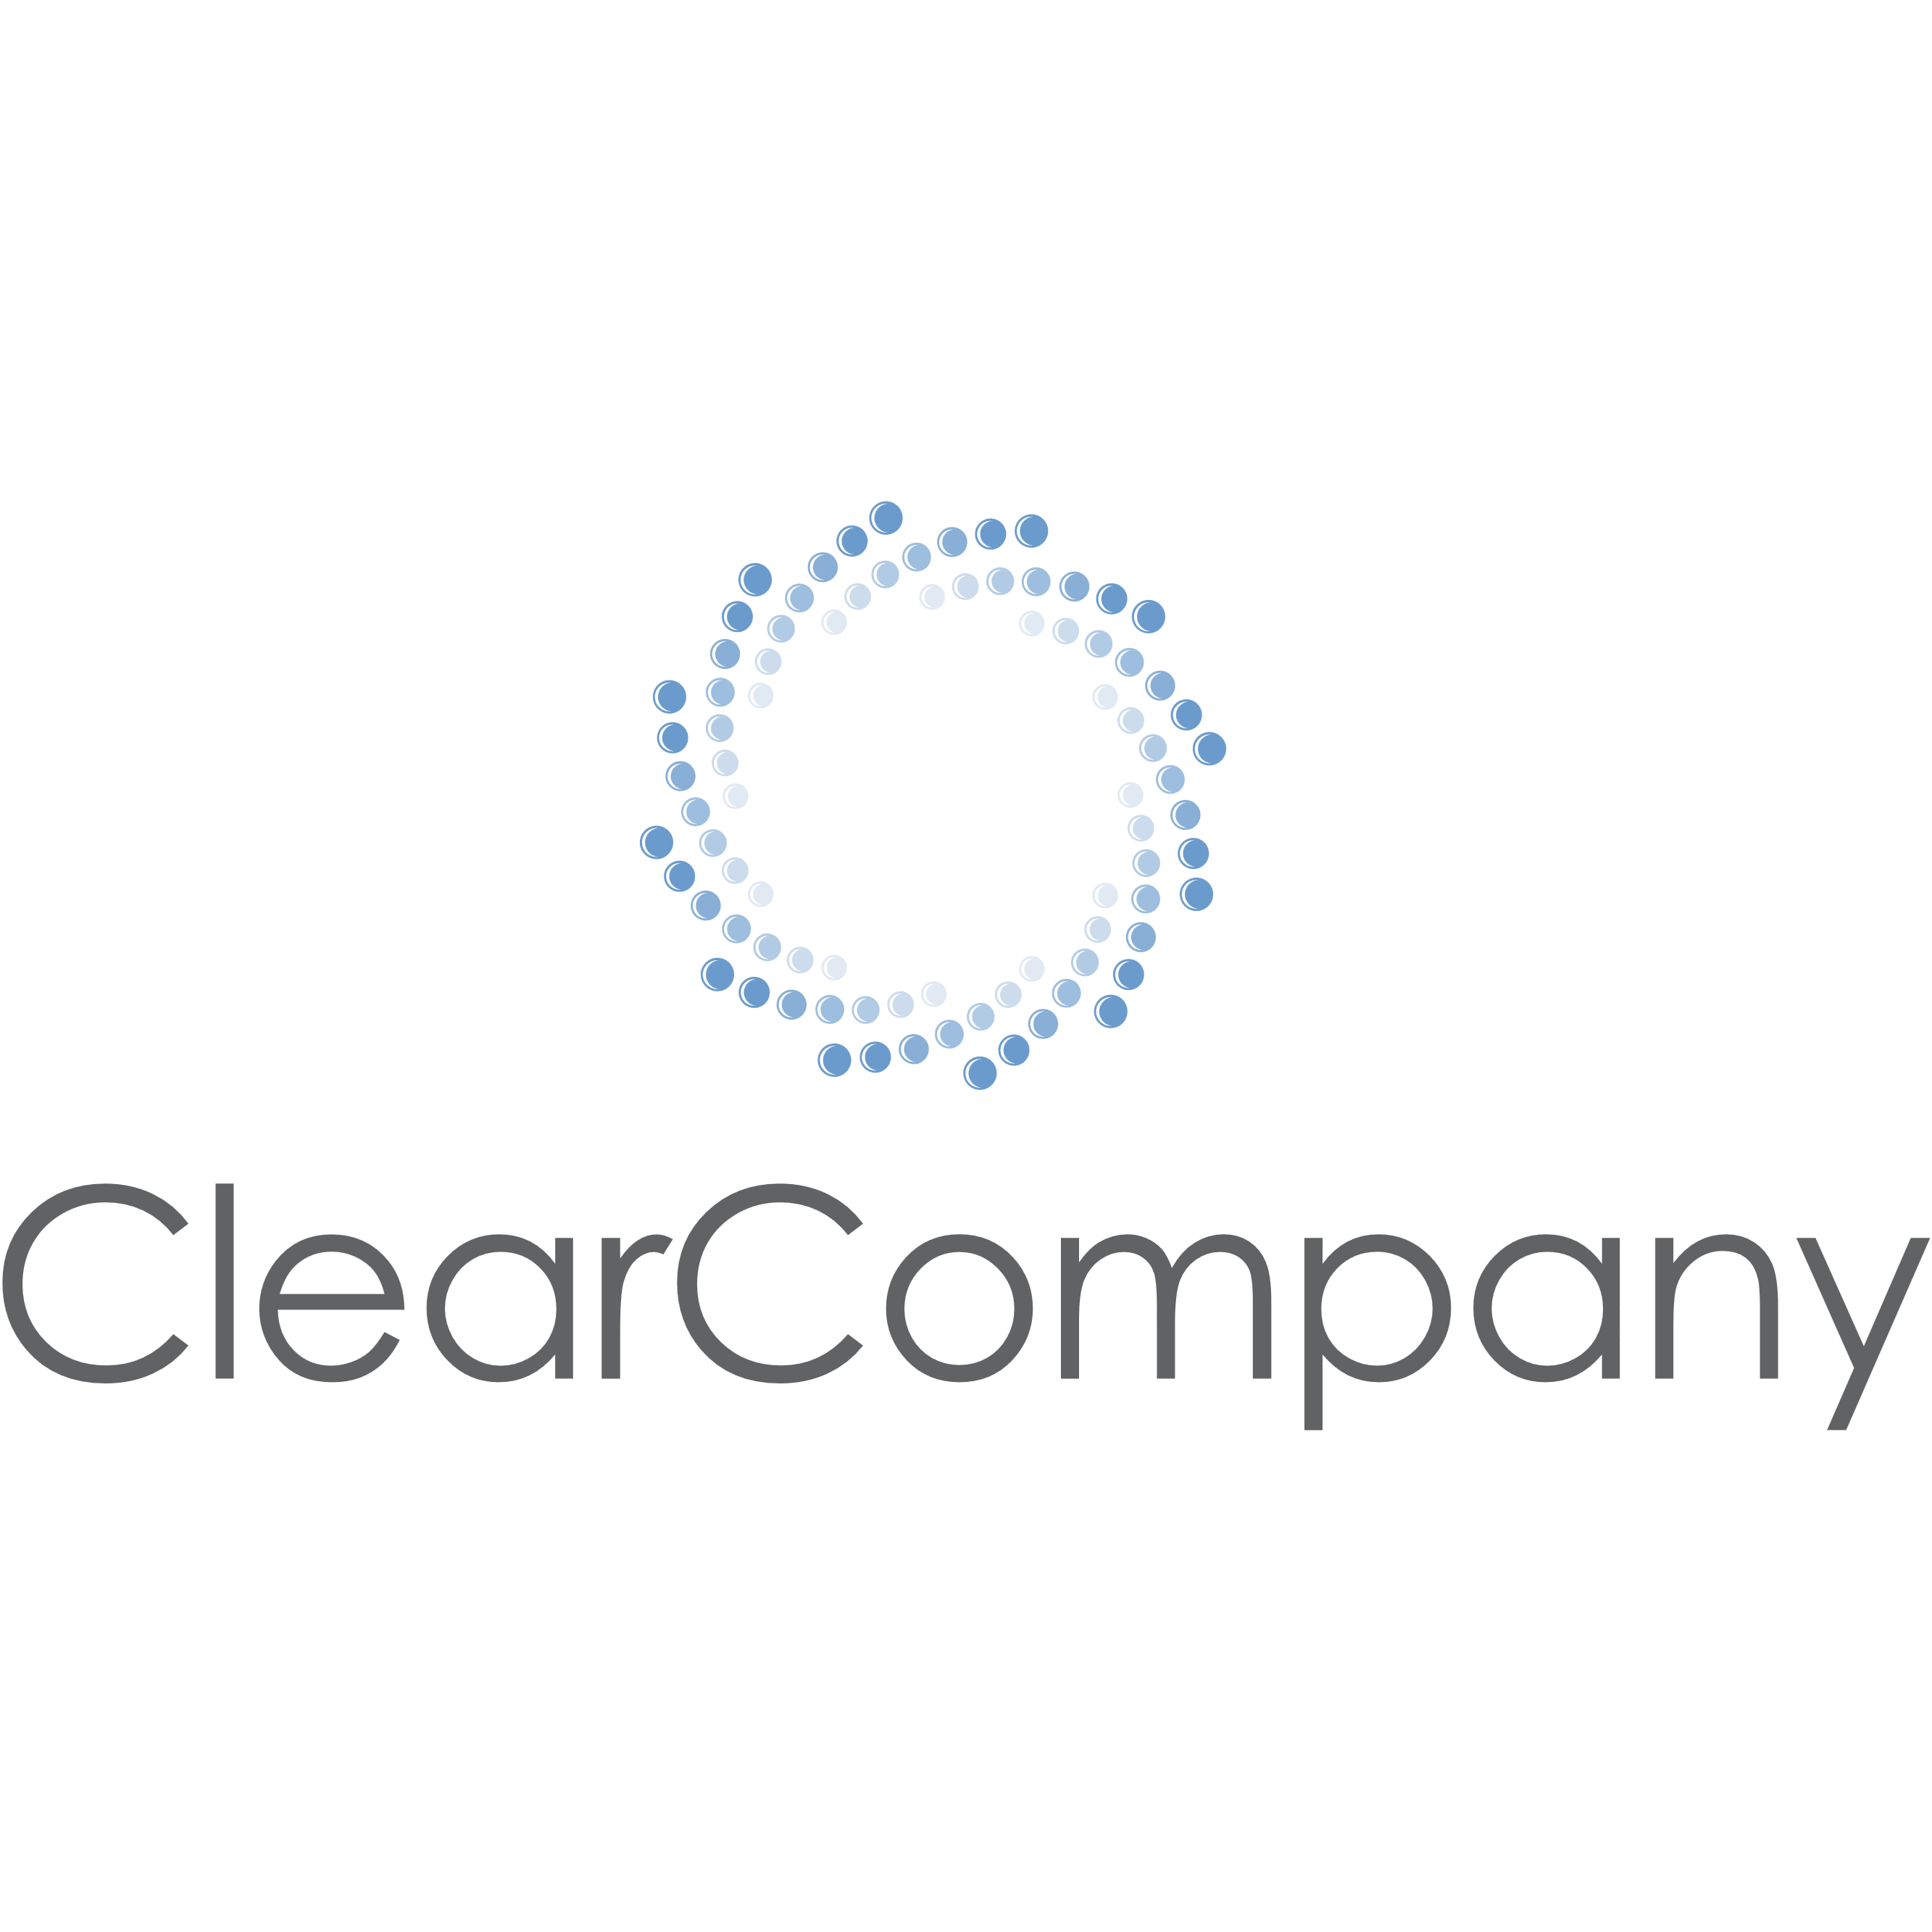 Clear Company Logo - ClearCompany Review – 2019 Pricing, Features, Shortcomings